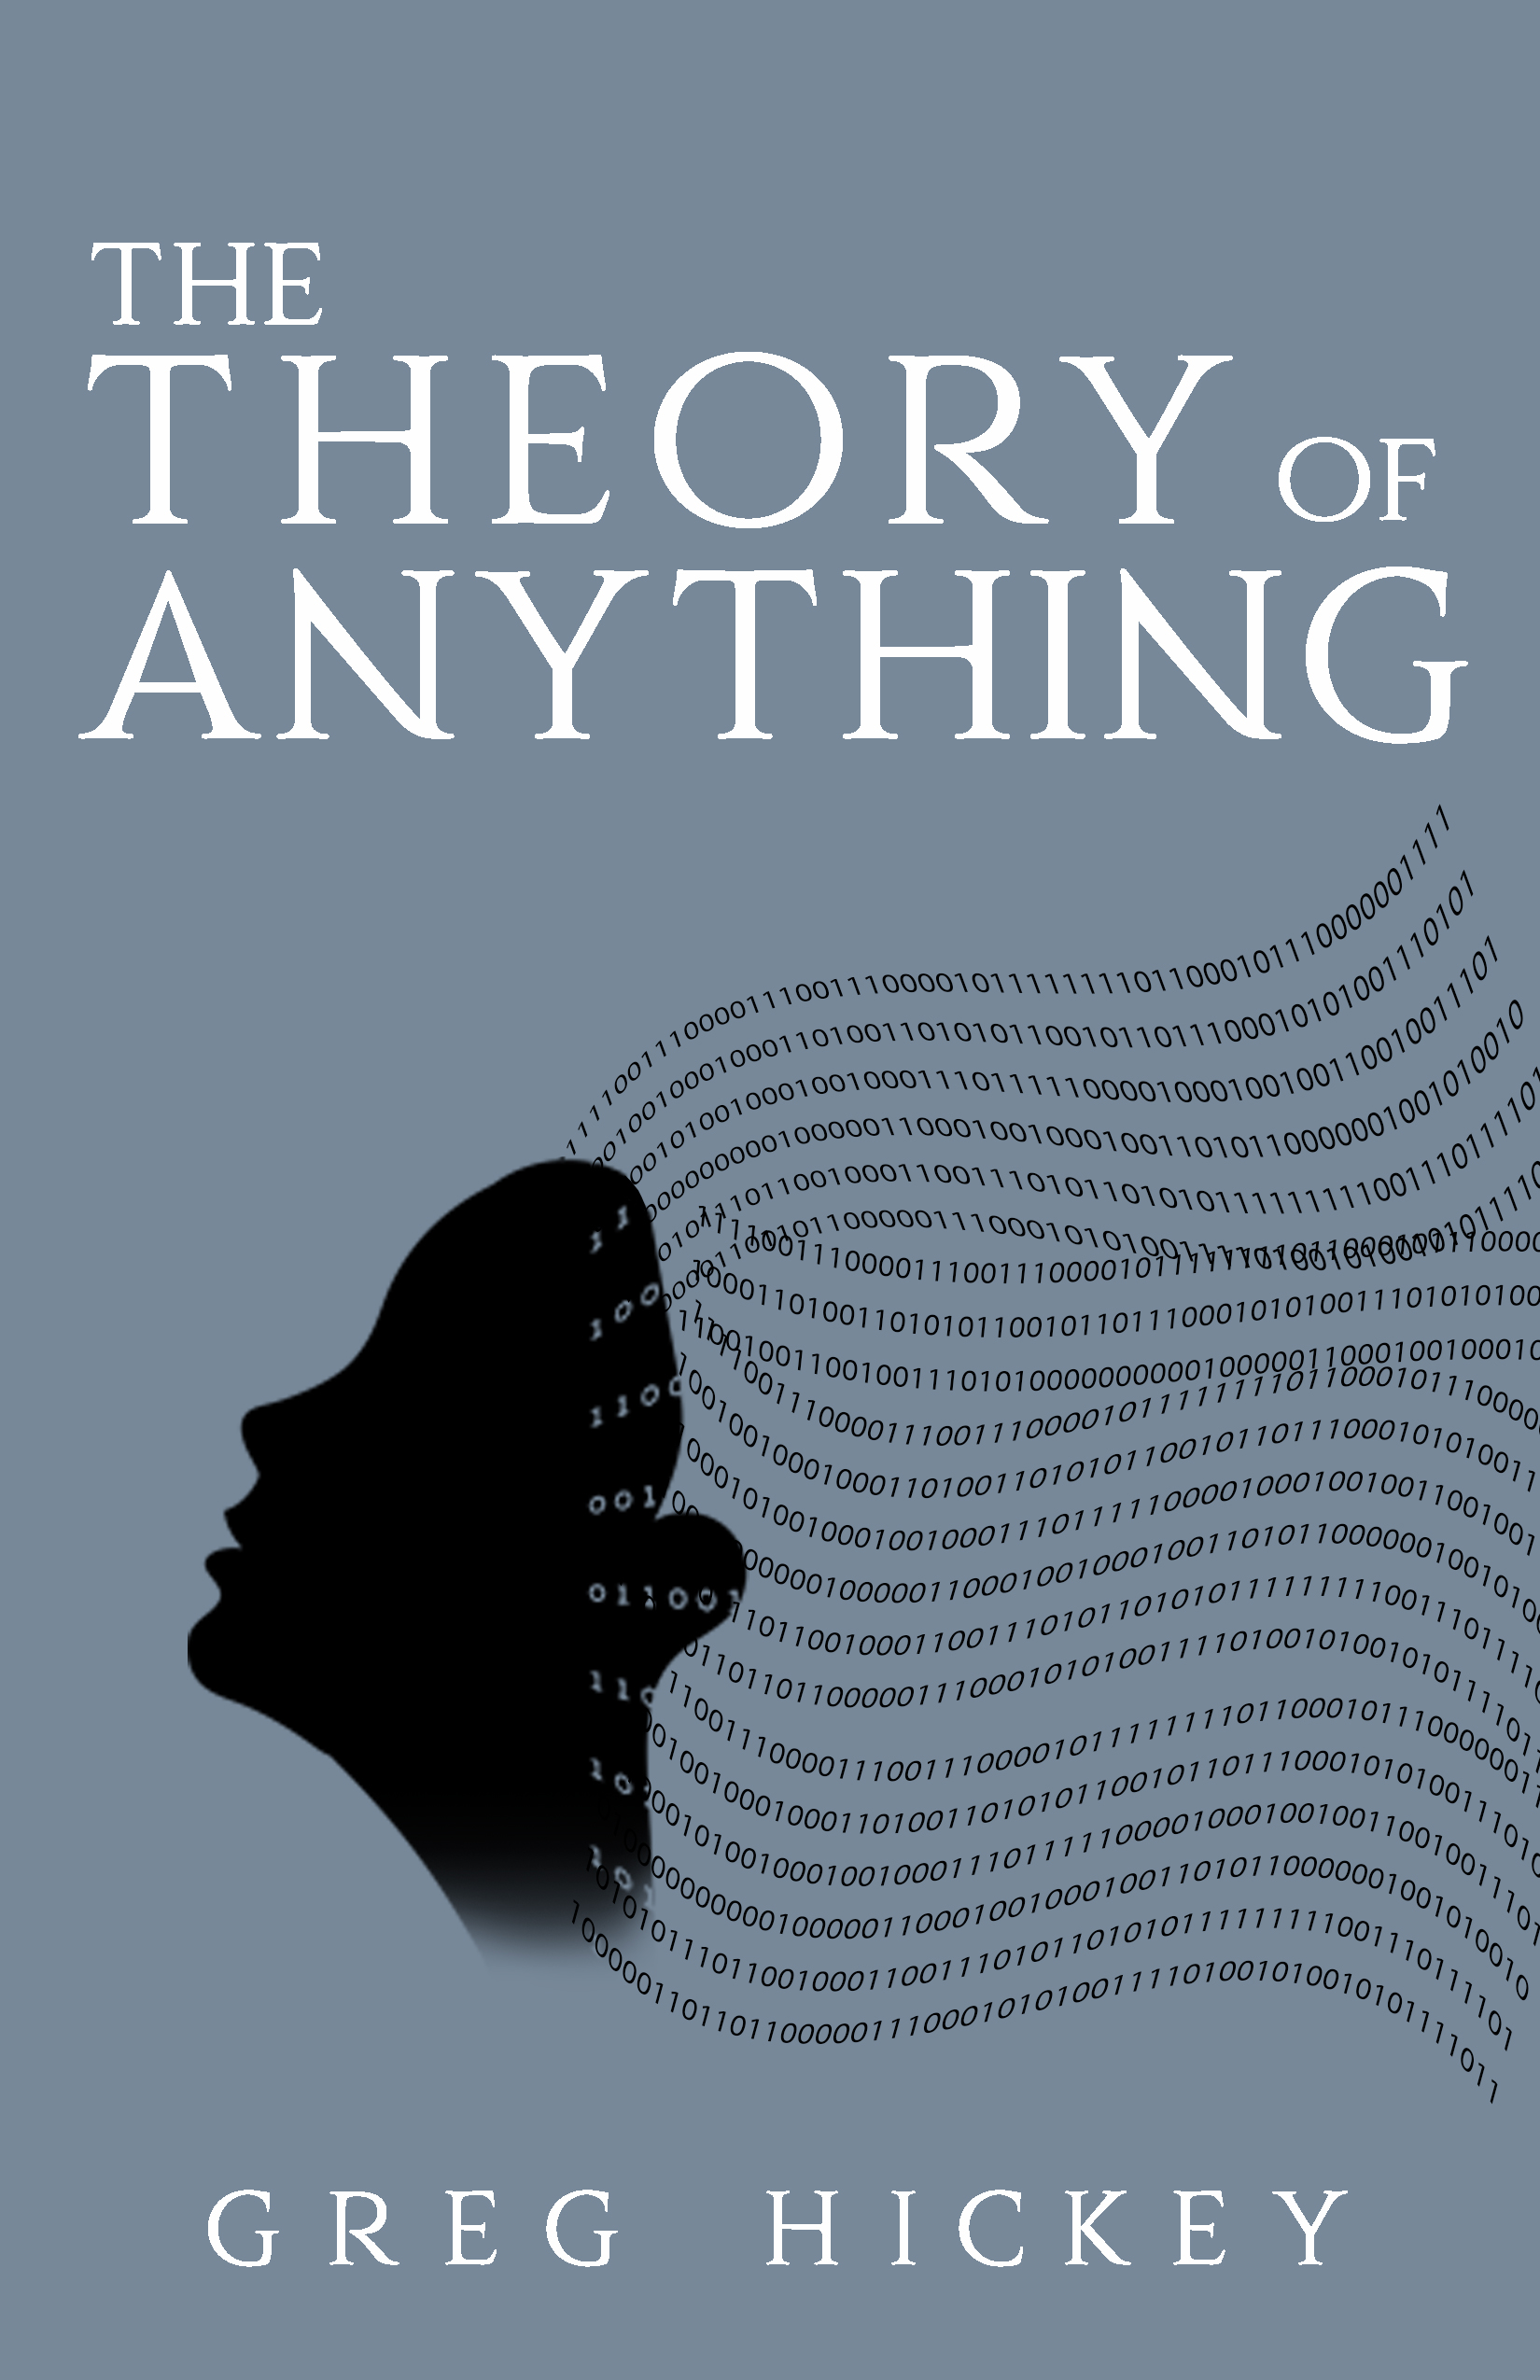 FREE: The Theory of Anything by Greg Hickey